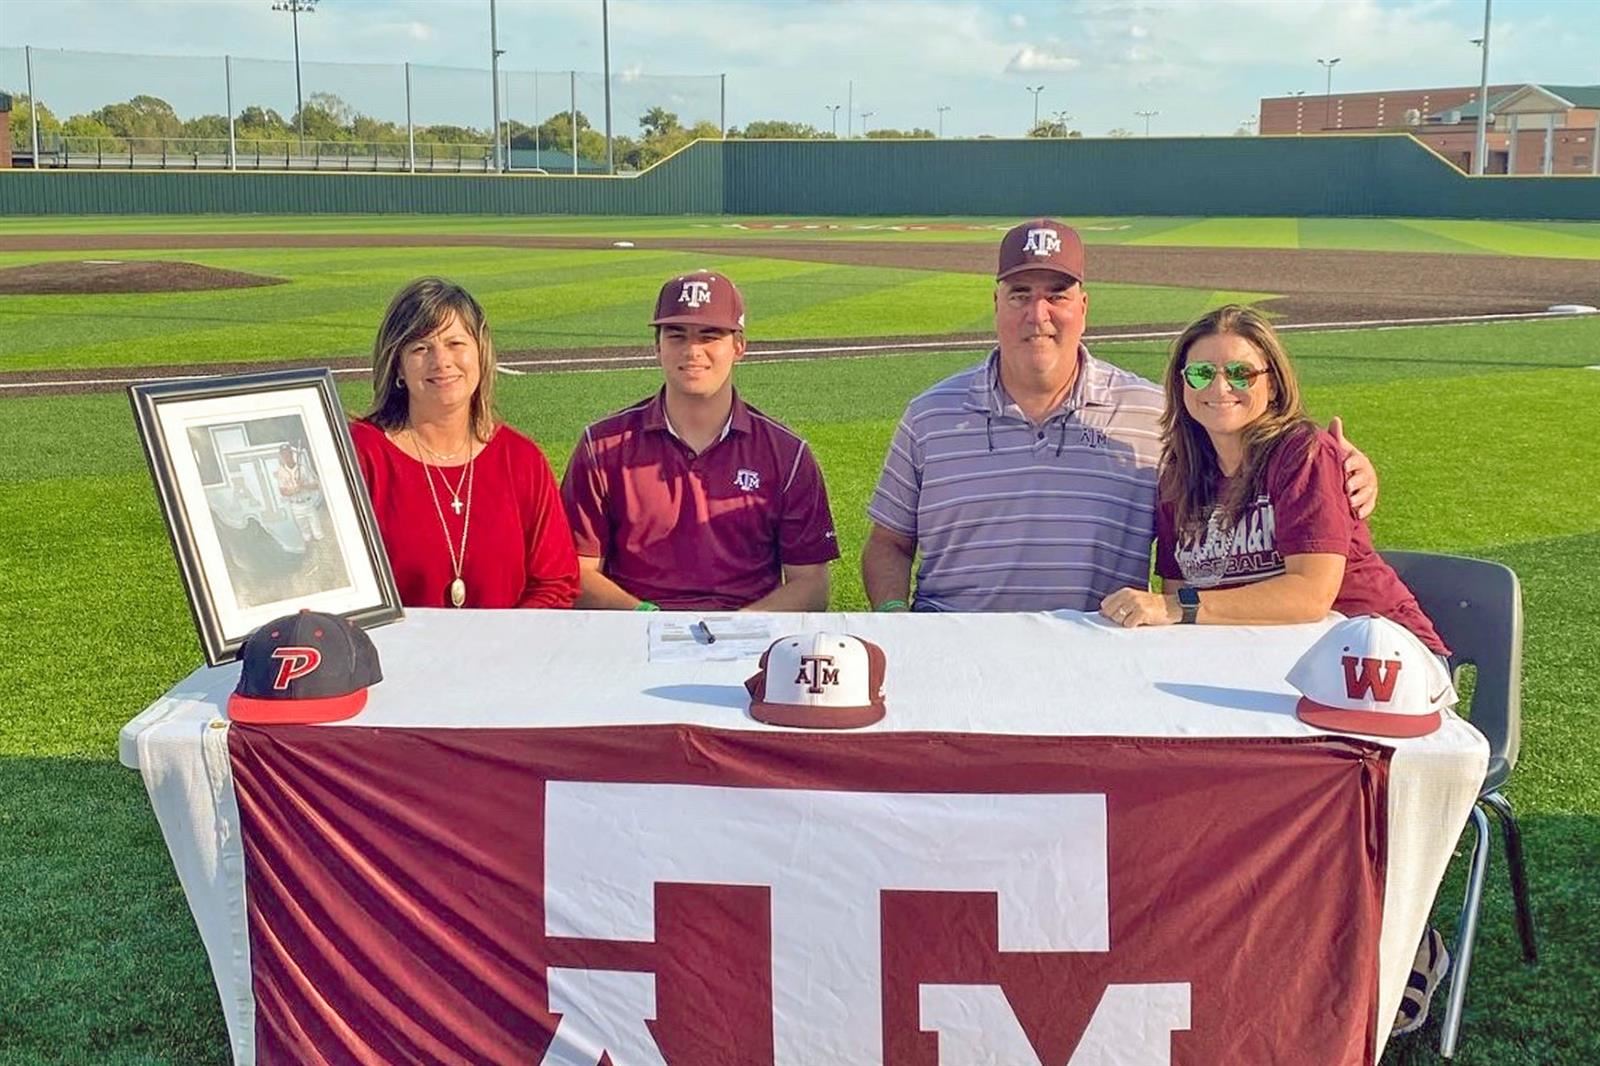 Cypress Woods High School senior Brady Sullivan, second from left, signed a letter of intent to play baseball at Texas A&M.